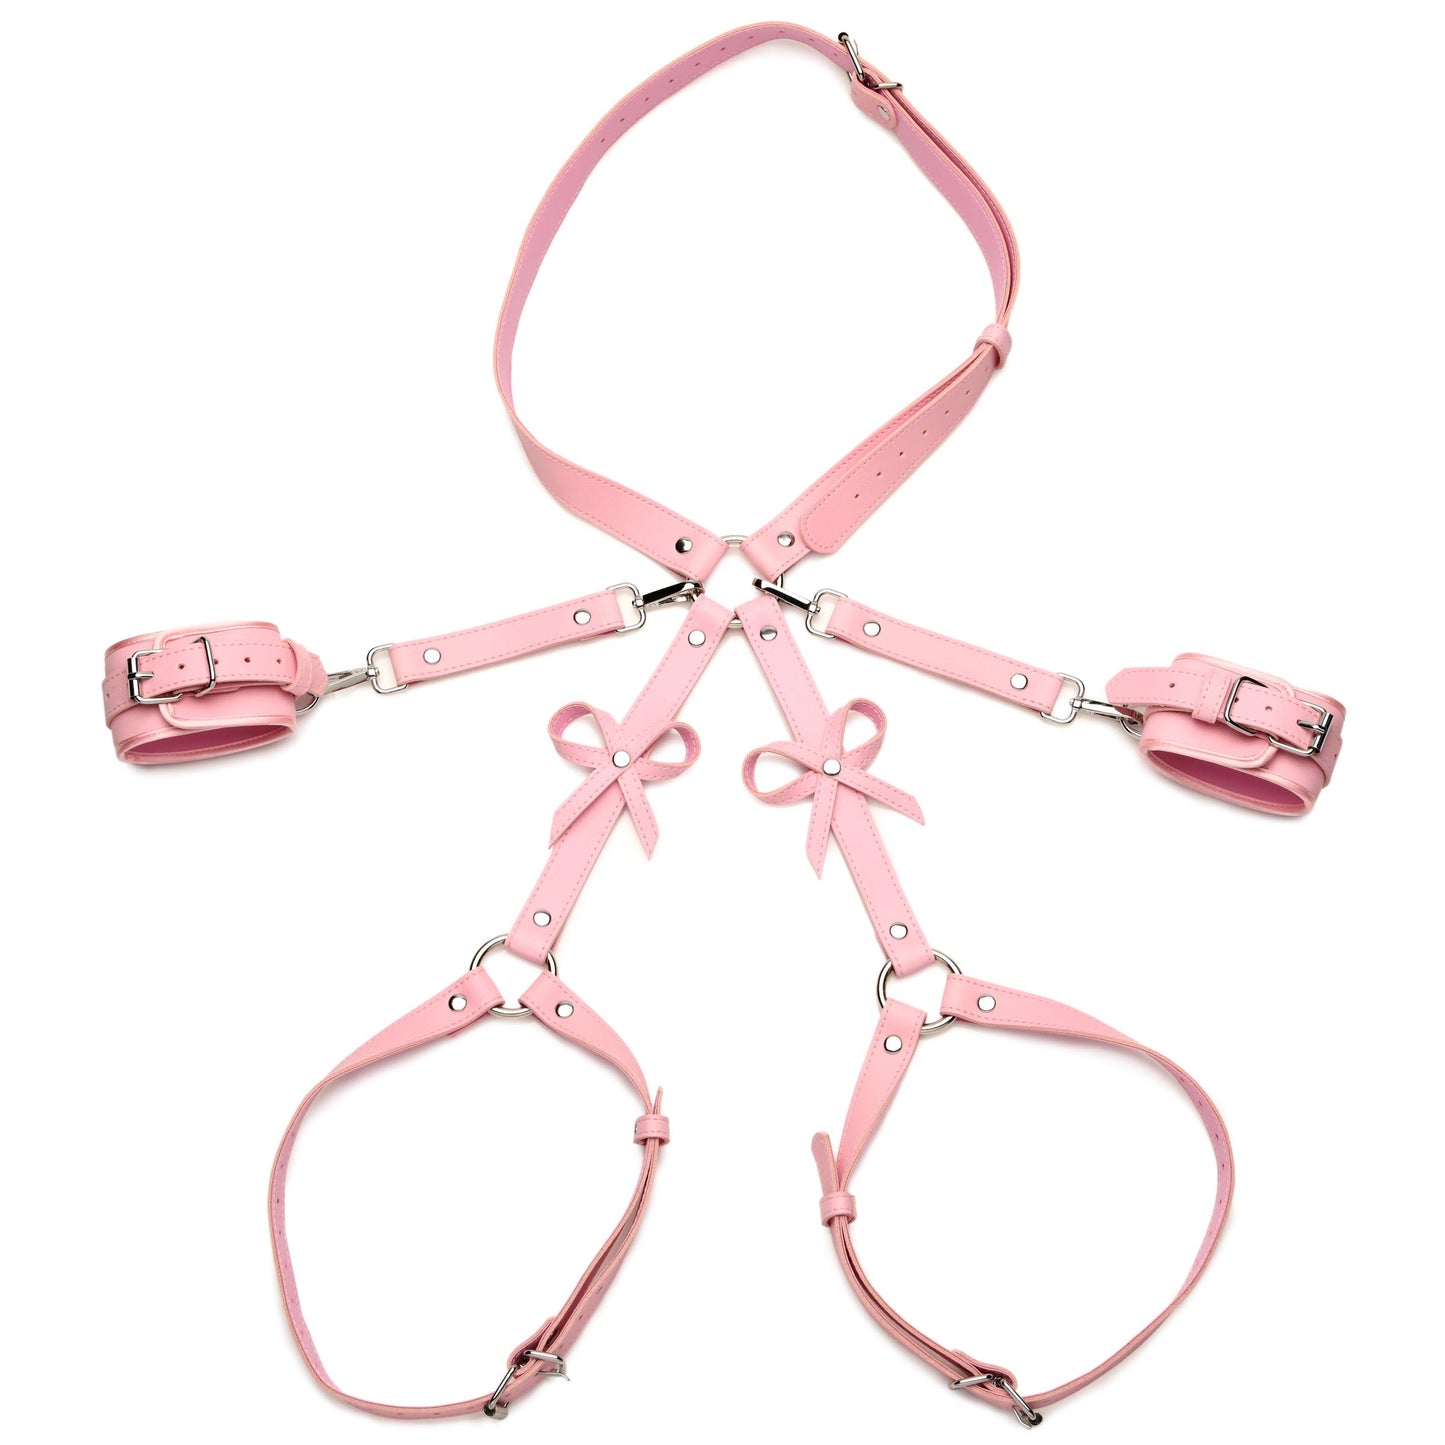 Pink Bondage Thigh Harness with Bows - XL/2XL